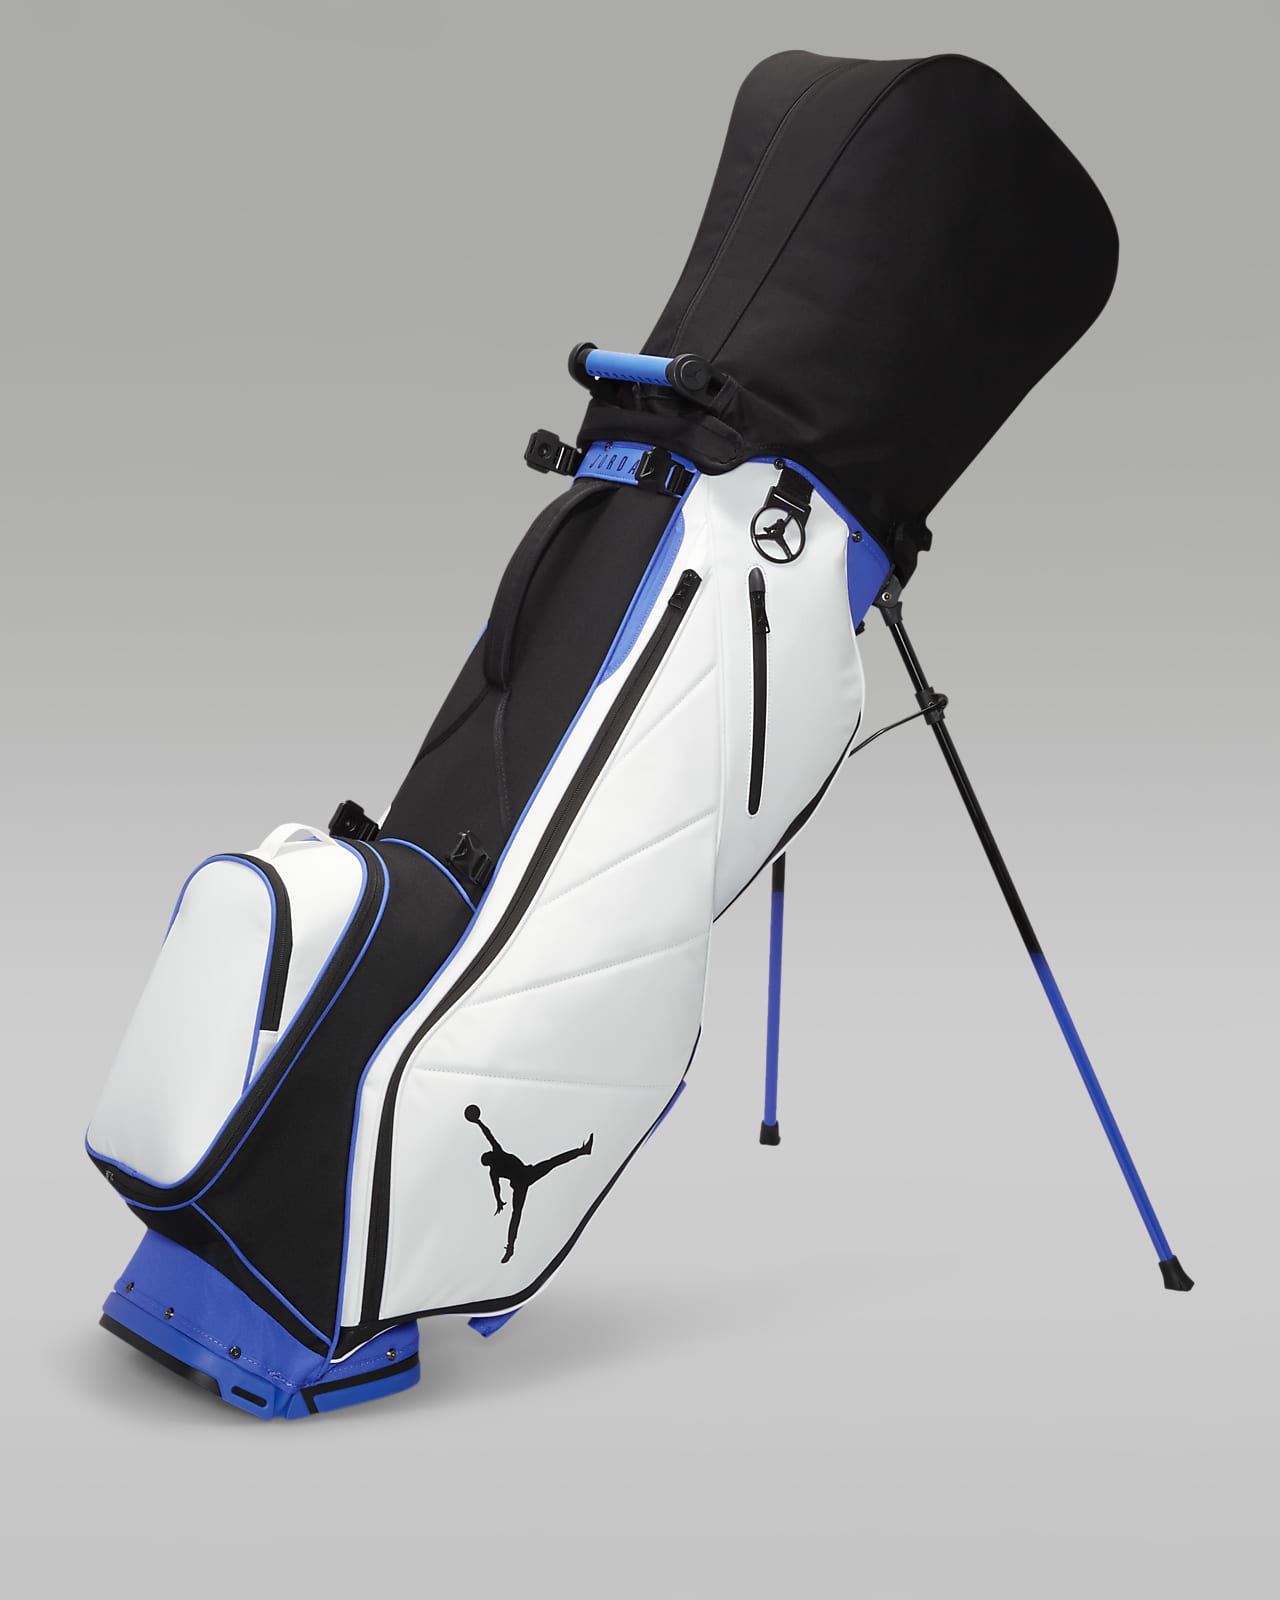 Best of: 6 golf shoe bags that are both functional and stylish